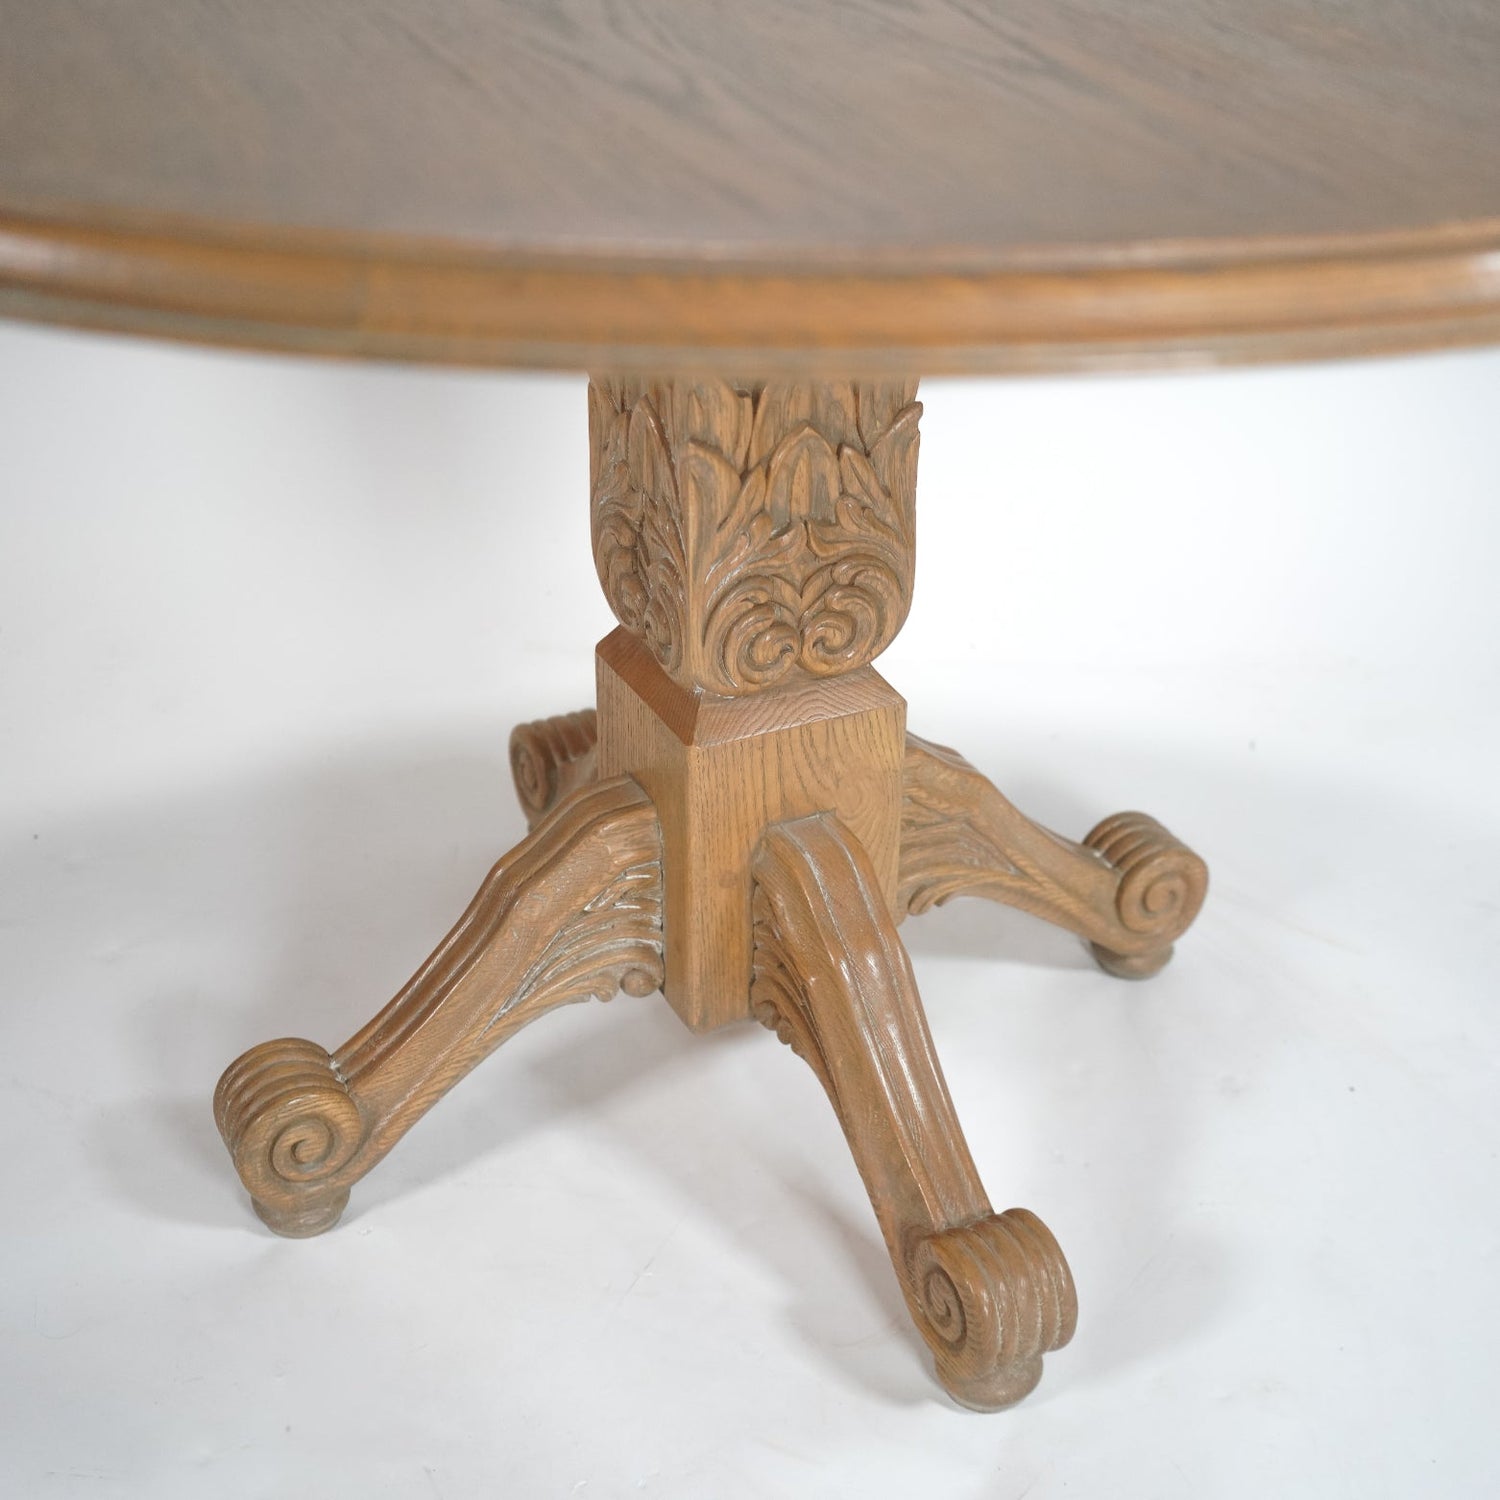 Wooden Dining Table - Sirdab - Unknown